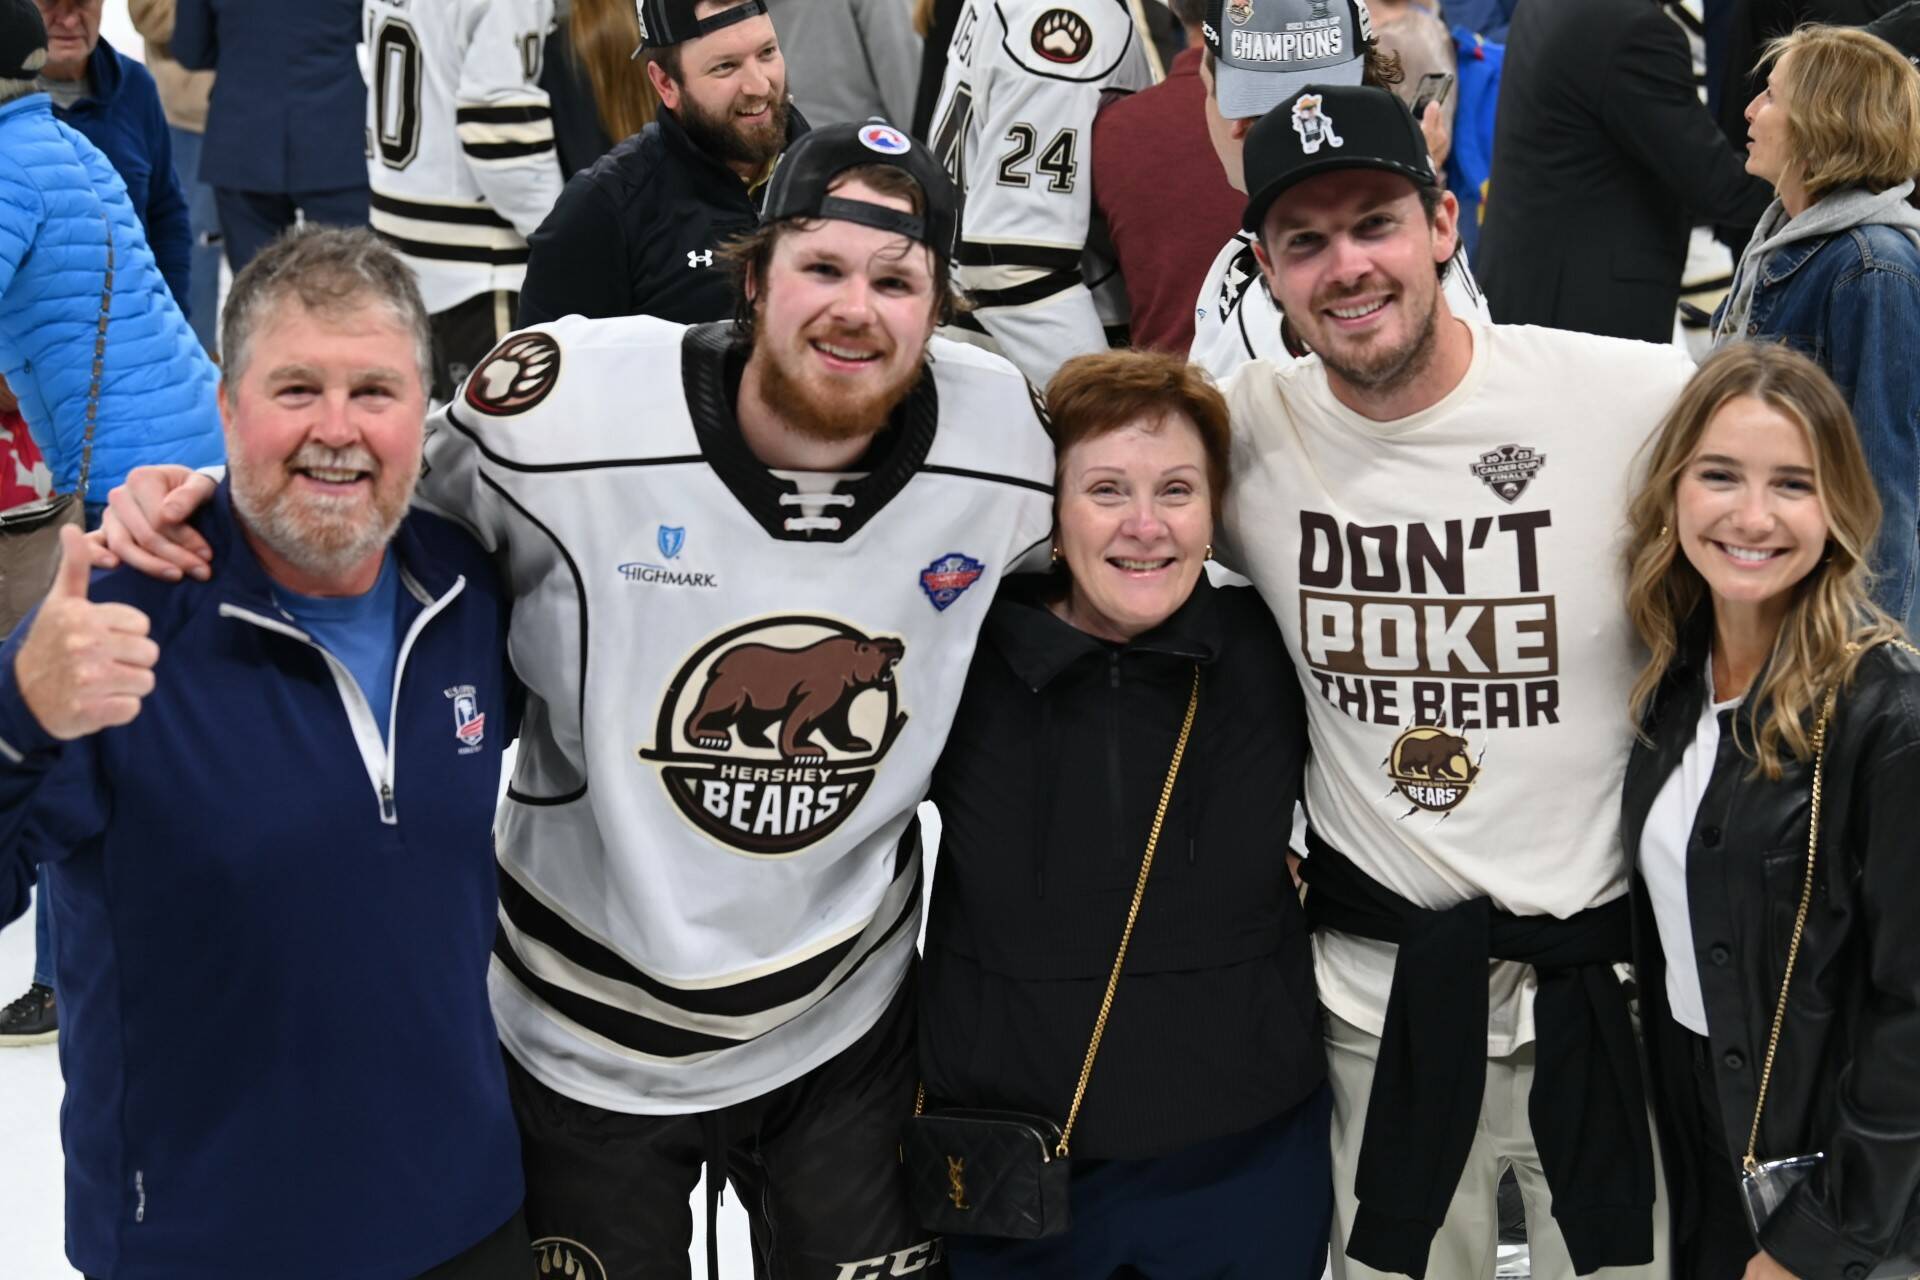 Randall, Lucas, Rosalind and Ryan Johansen - along with Ryan’s girlfriend Abbey Gray - celebrate Lucas and the Hershey Bears winning the AHL Championship in Palm Springs last Wednesday. Photo courtesy of Randall Johansen